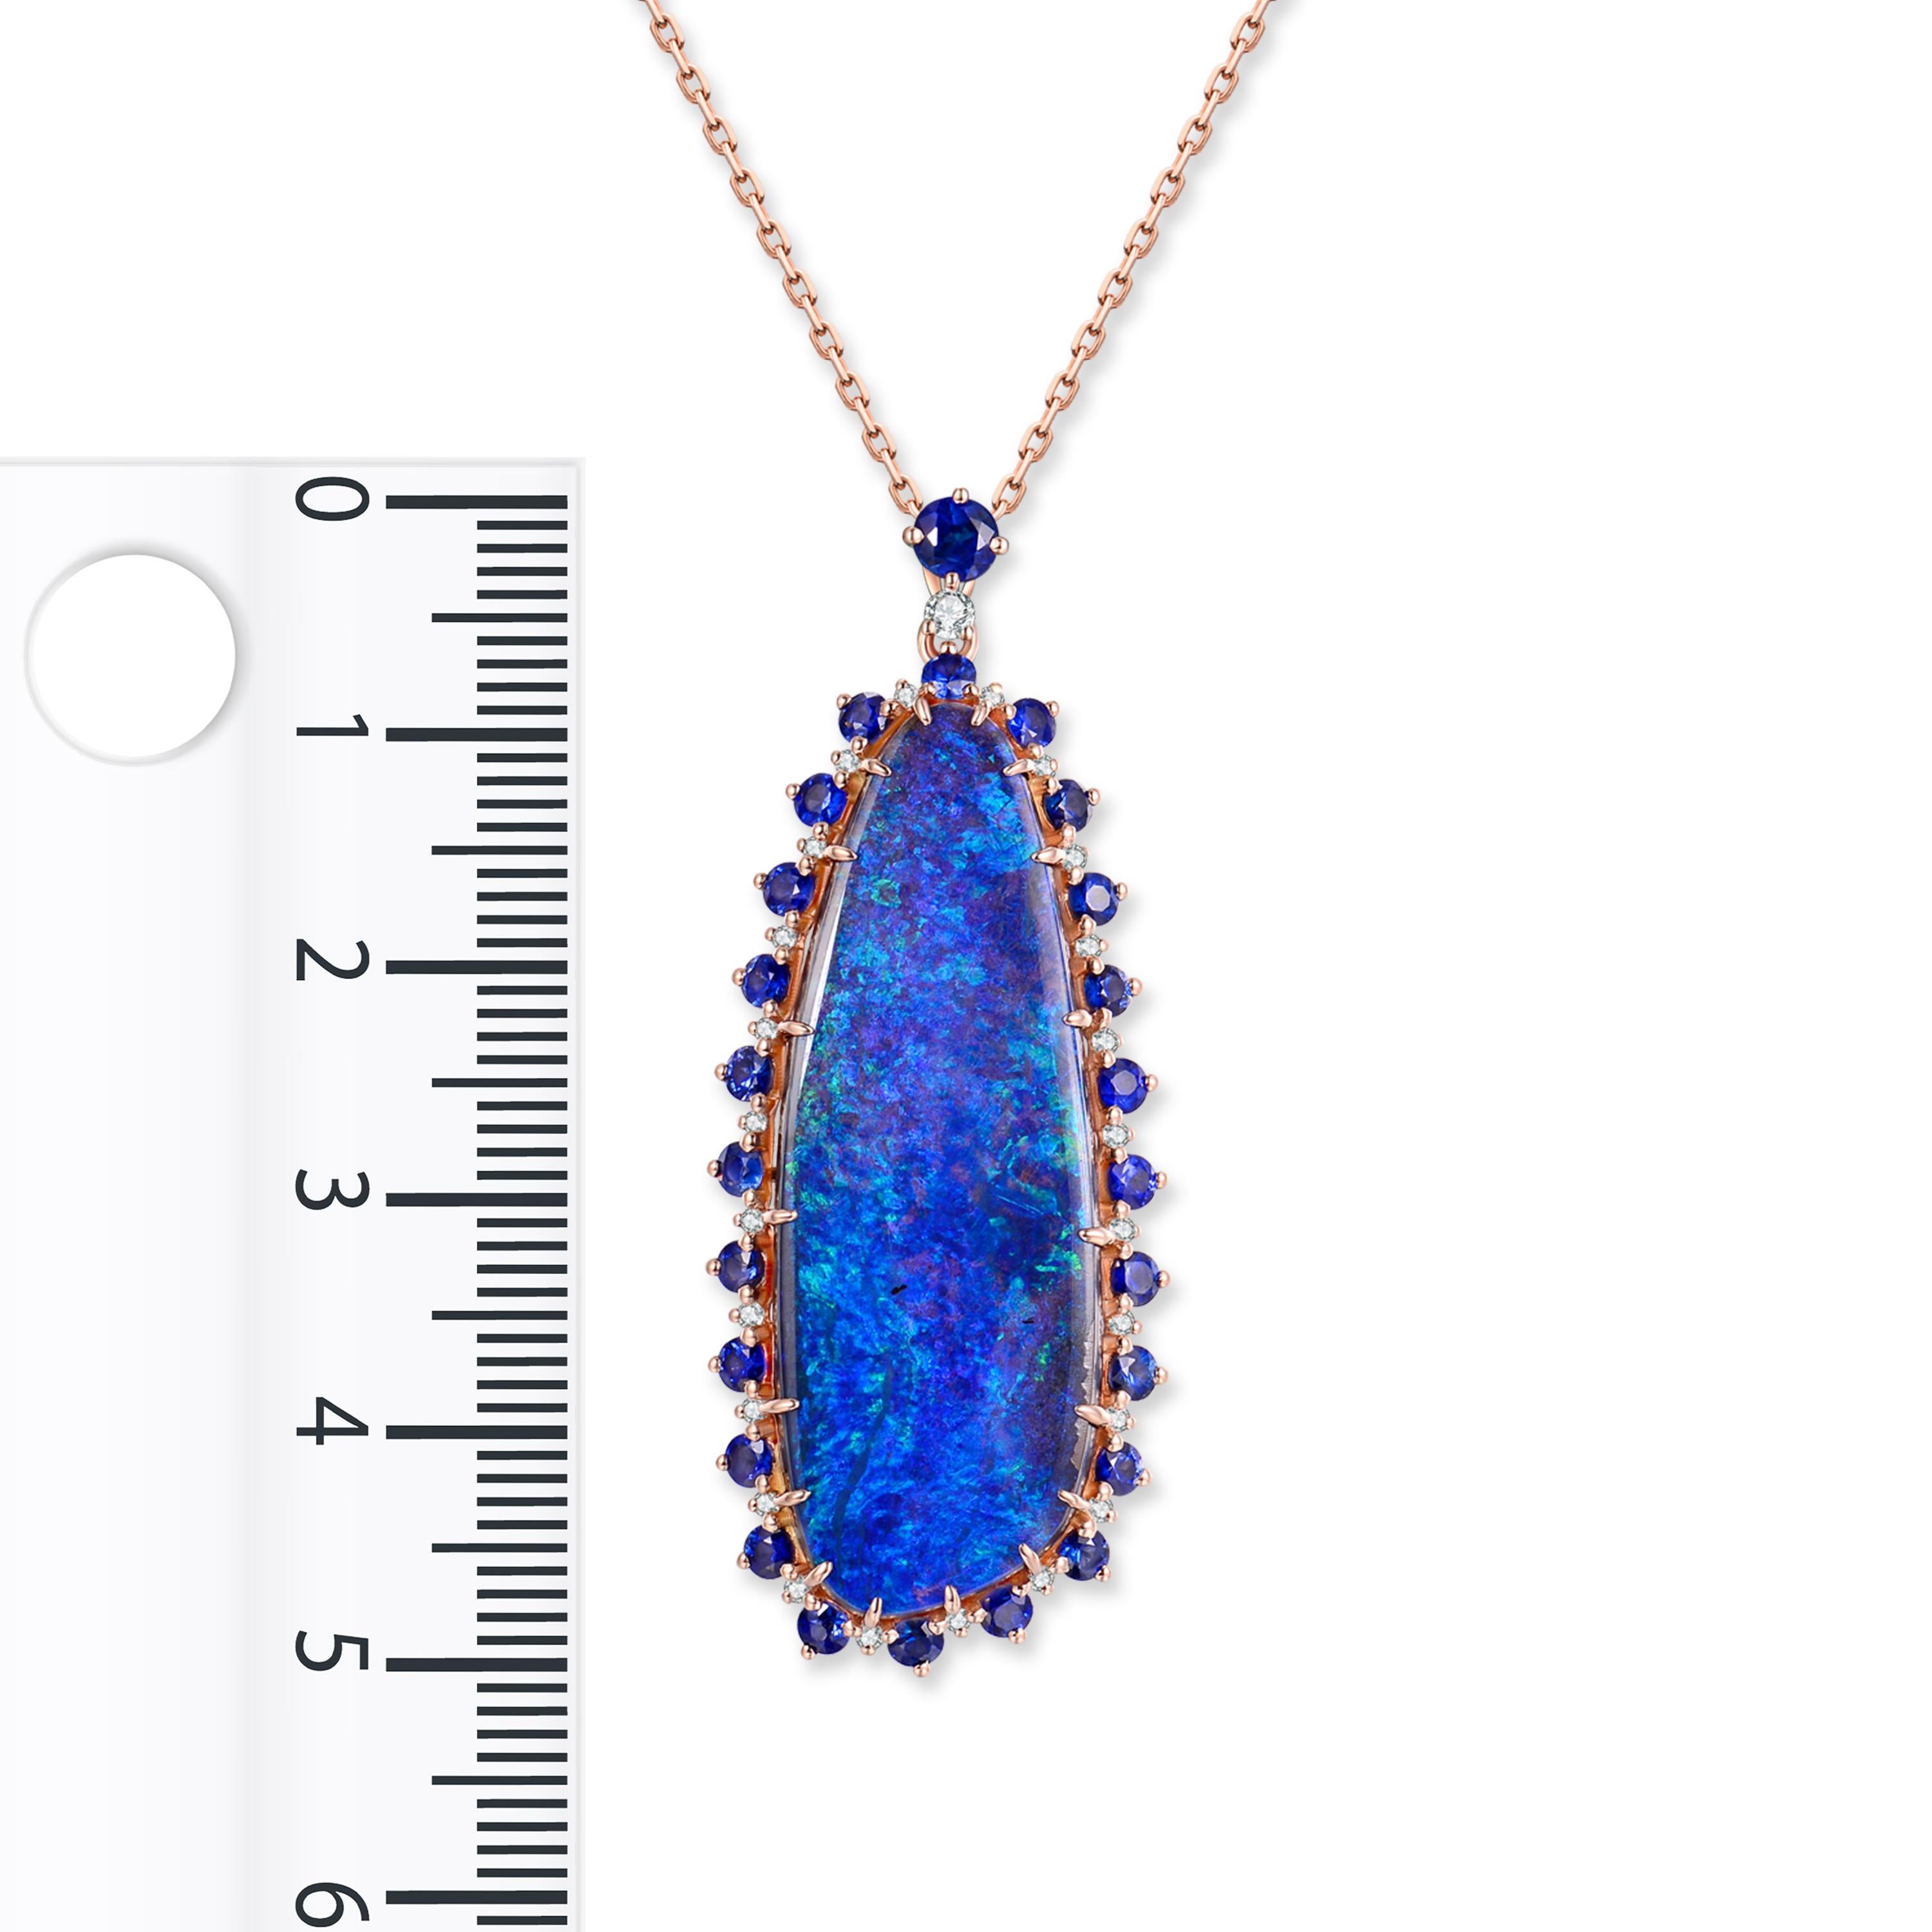 Description:
A one-of-a-kind midnight blue 36.3ct opal pendant, bordered with 0.36ct brilliant diamonds and 2.02ct deep blue sapphires set in 18 karat rose gold.

Opal care: Clean opals with lukewarm soapy water.

Specification:
Size (LxW): 50mm x